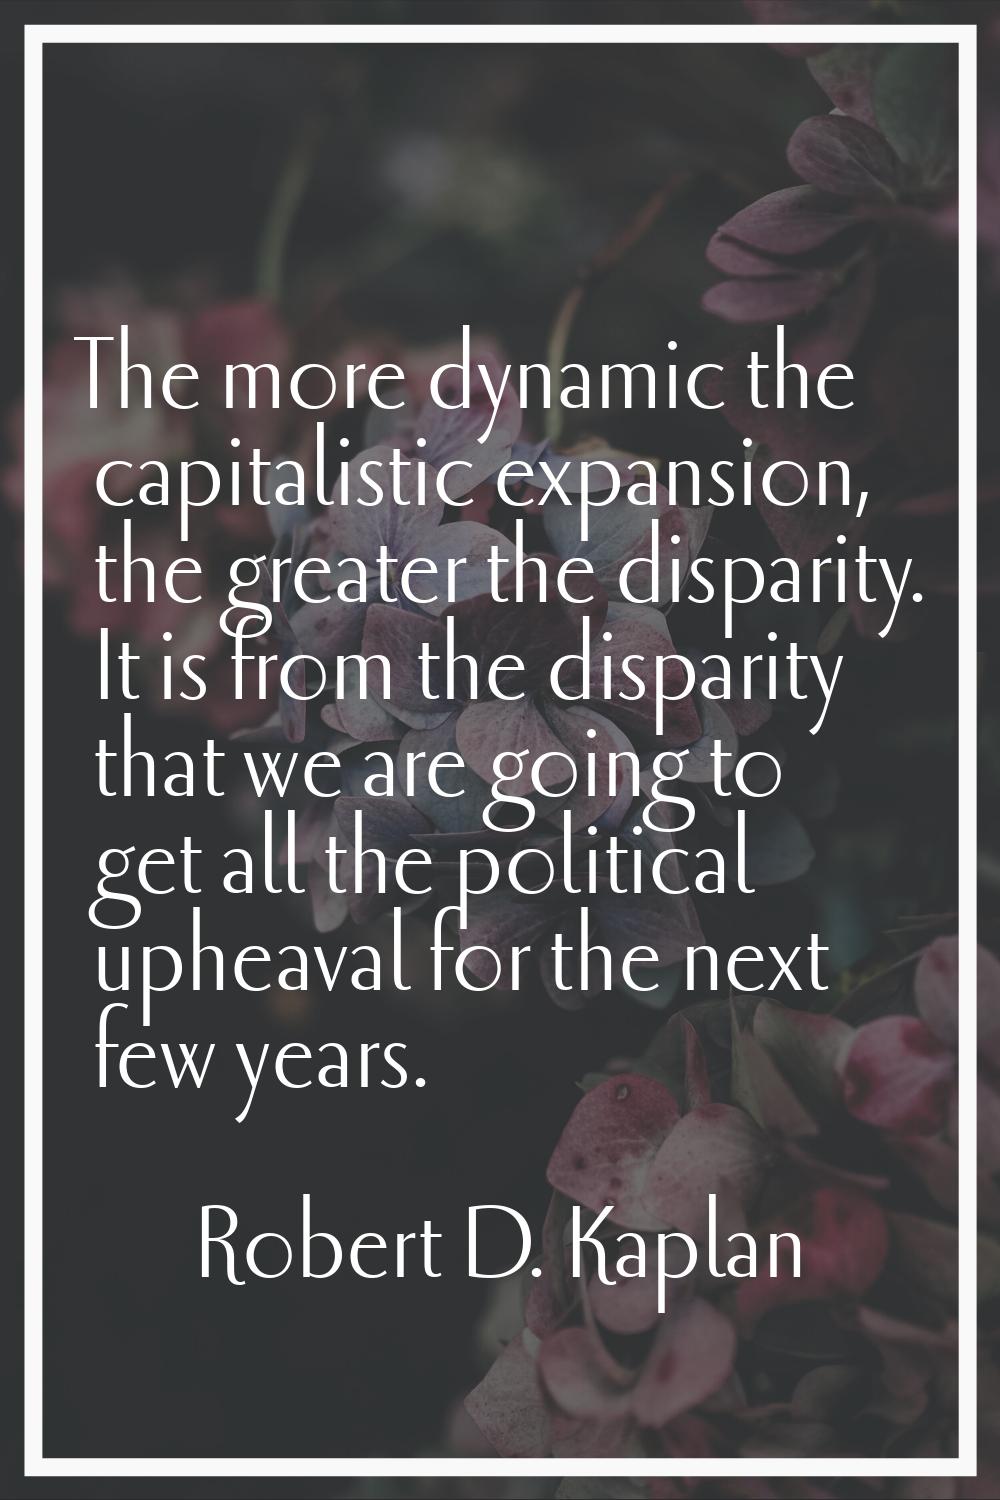 The more dynamic the capitalistic expansion, the greater the disparity. It is from the disparity th